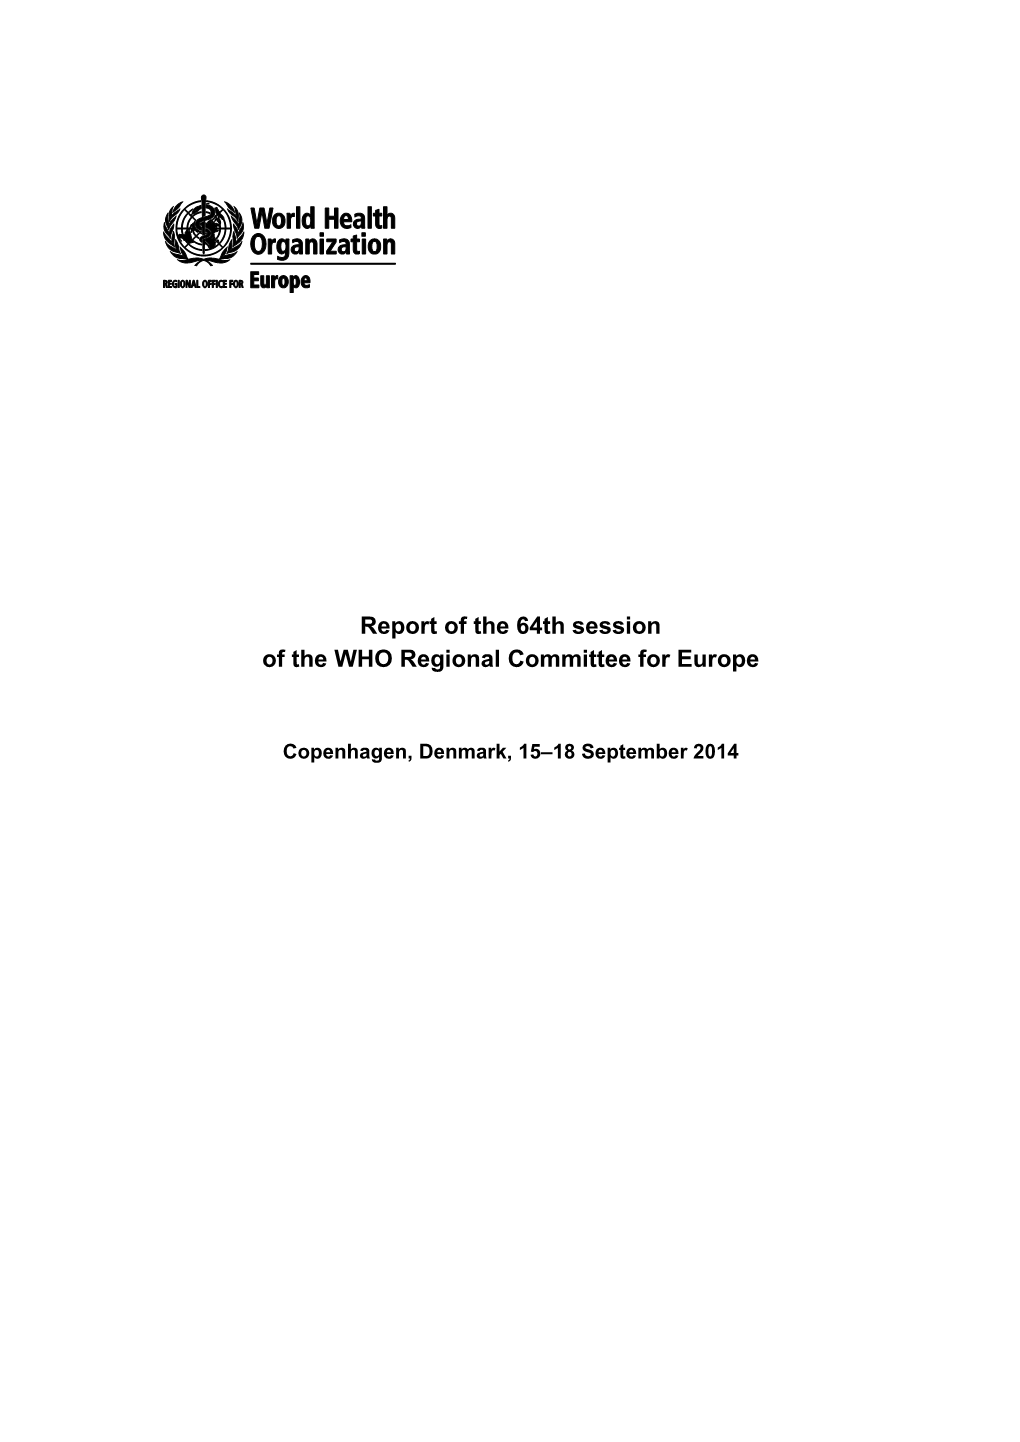 Report of the 64Th Session of the WHO Regional Committee for Europe